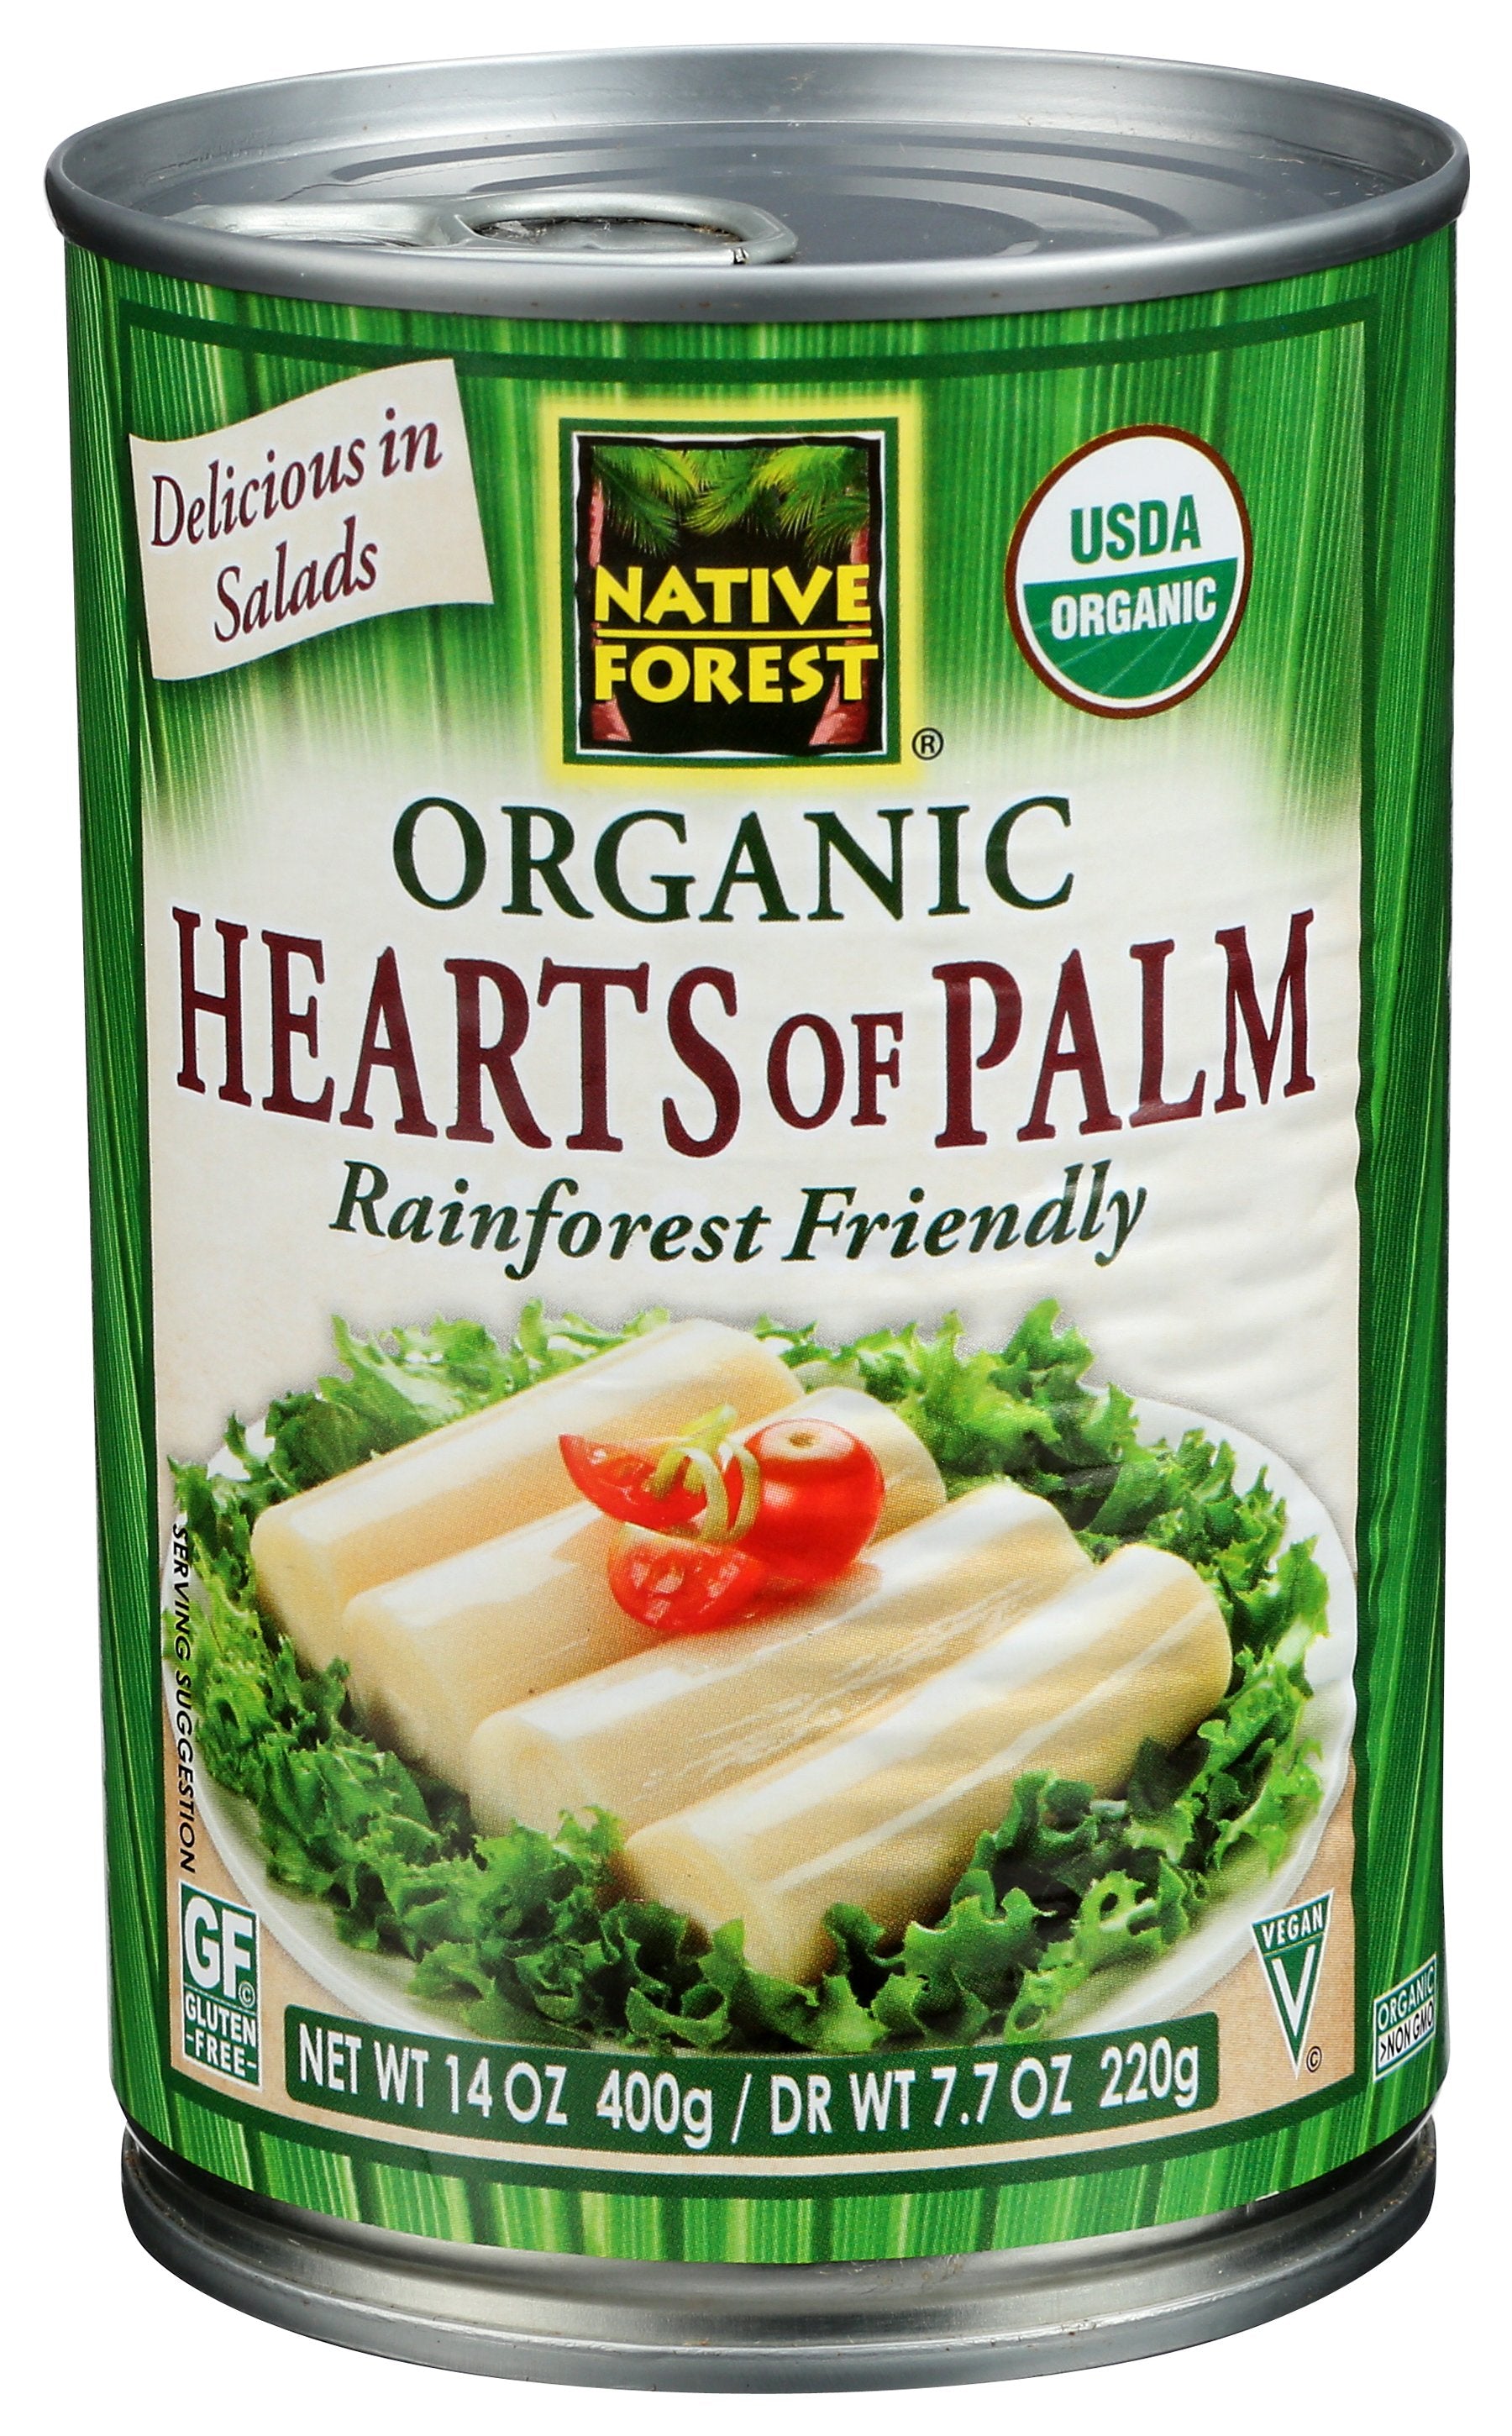 NATIVE FOREST HEARTS OF PALM